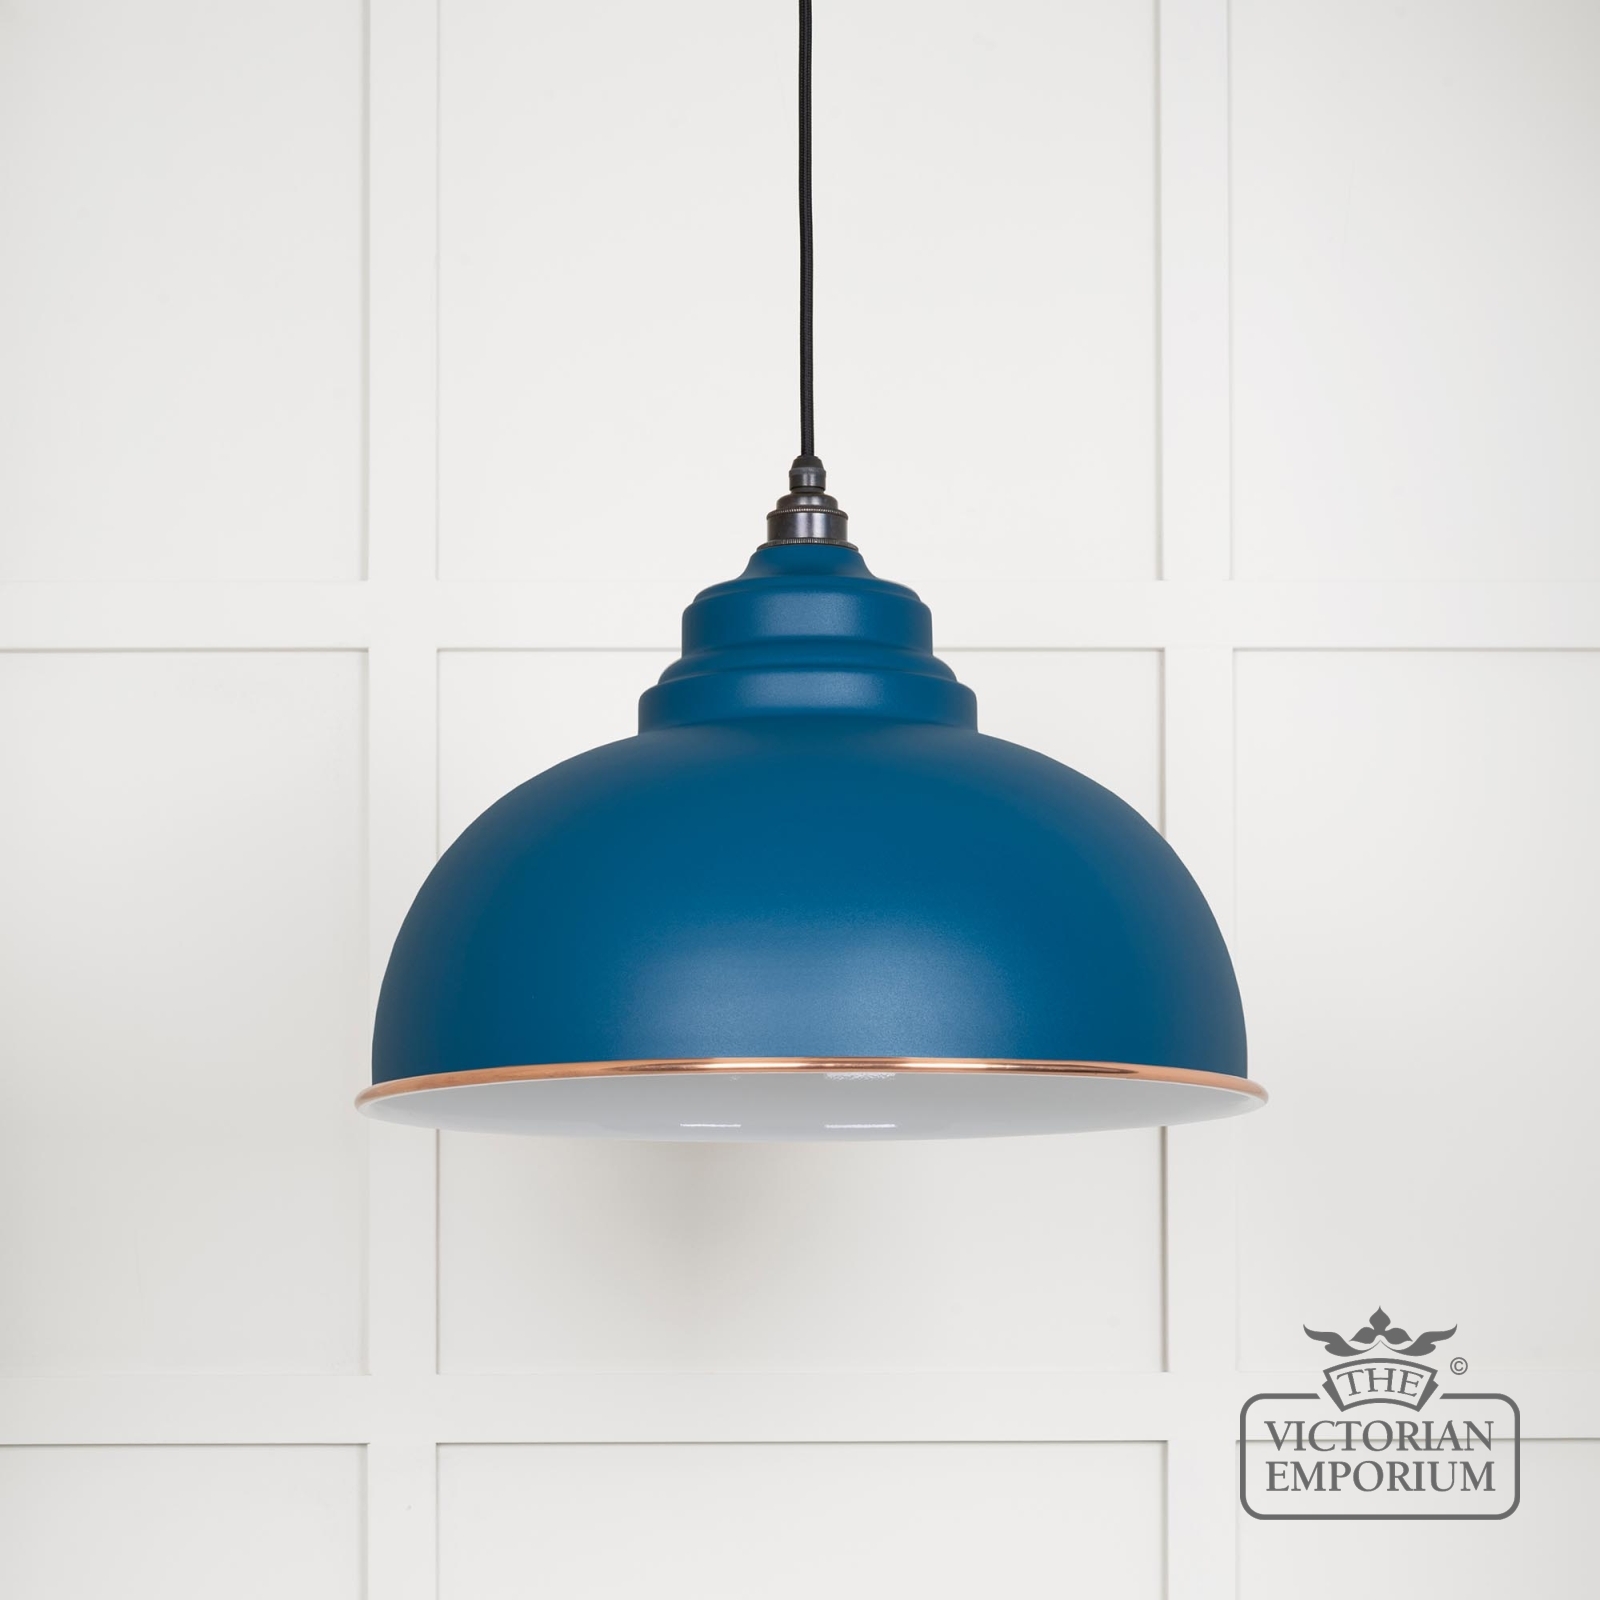 Harlow pendant light in Upstream with white gloss interior